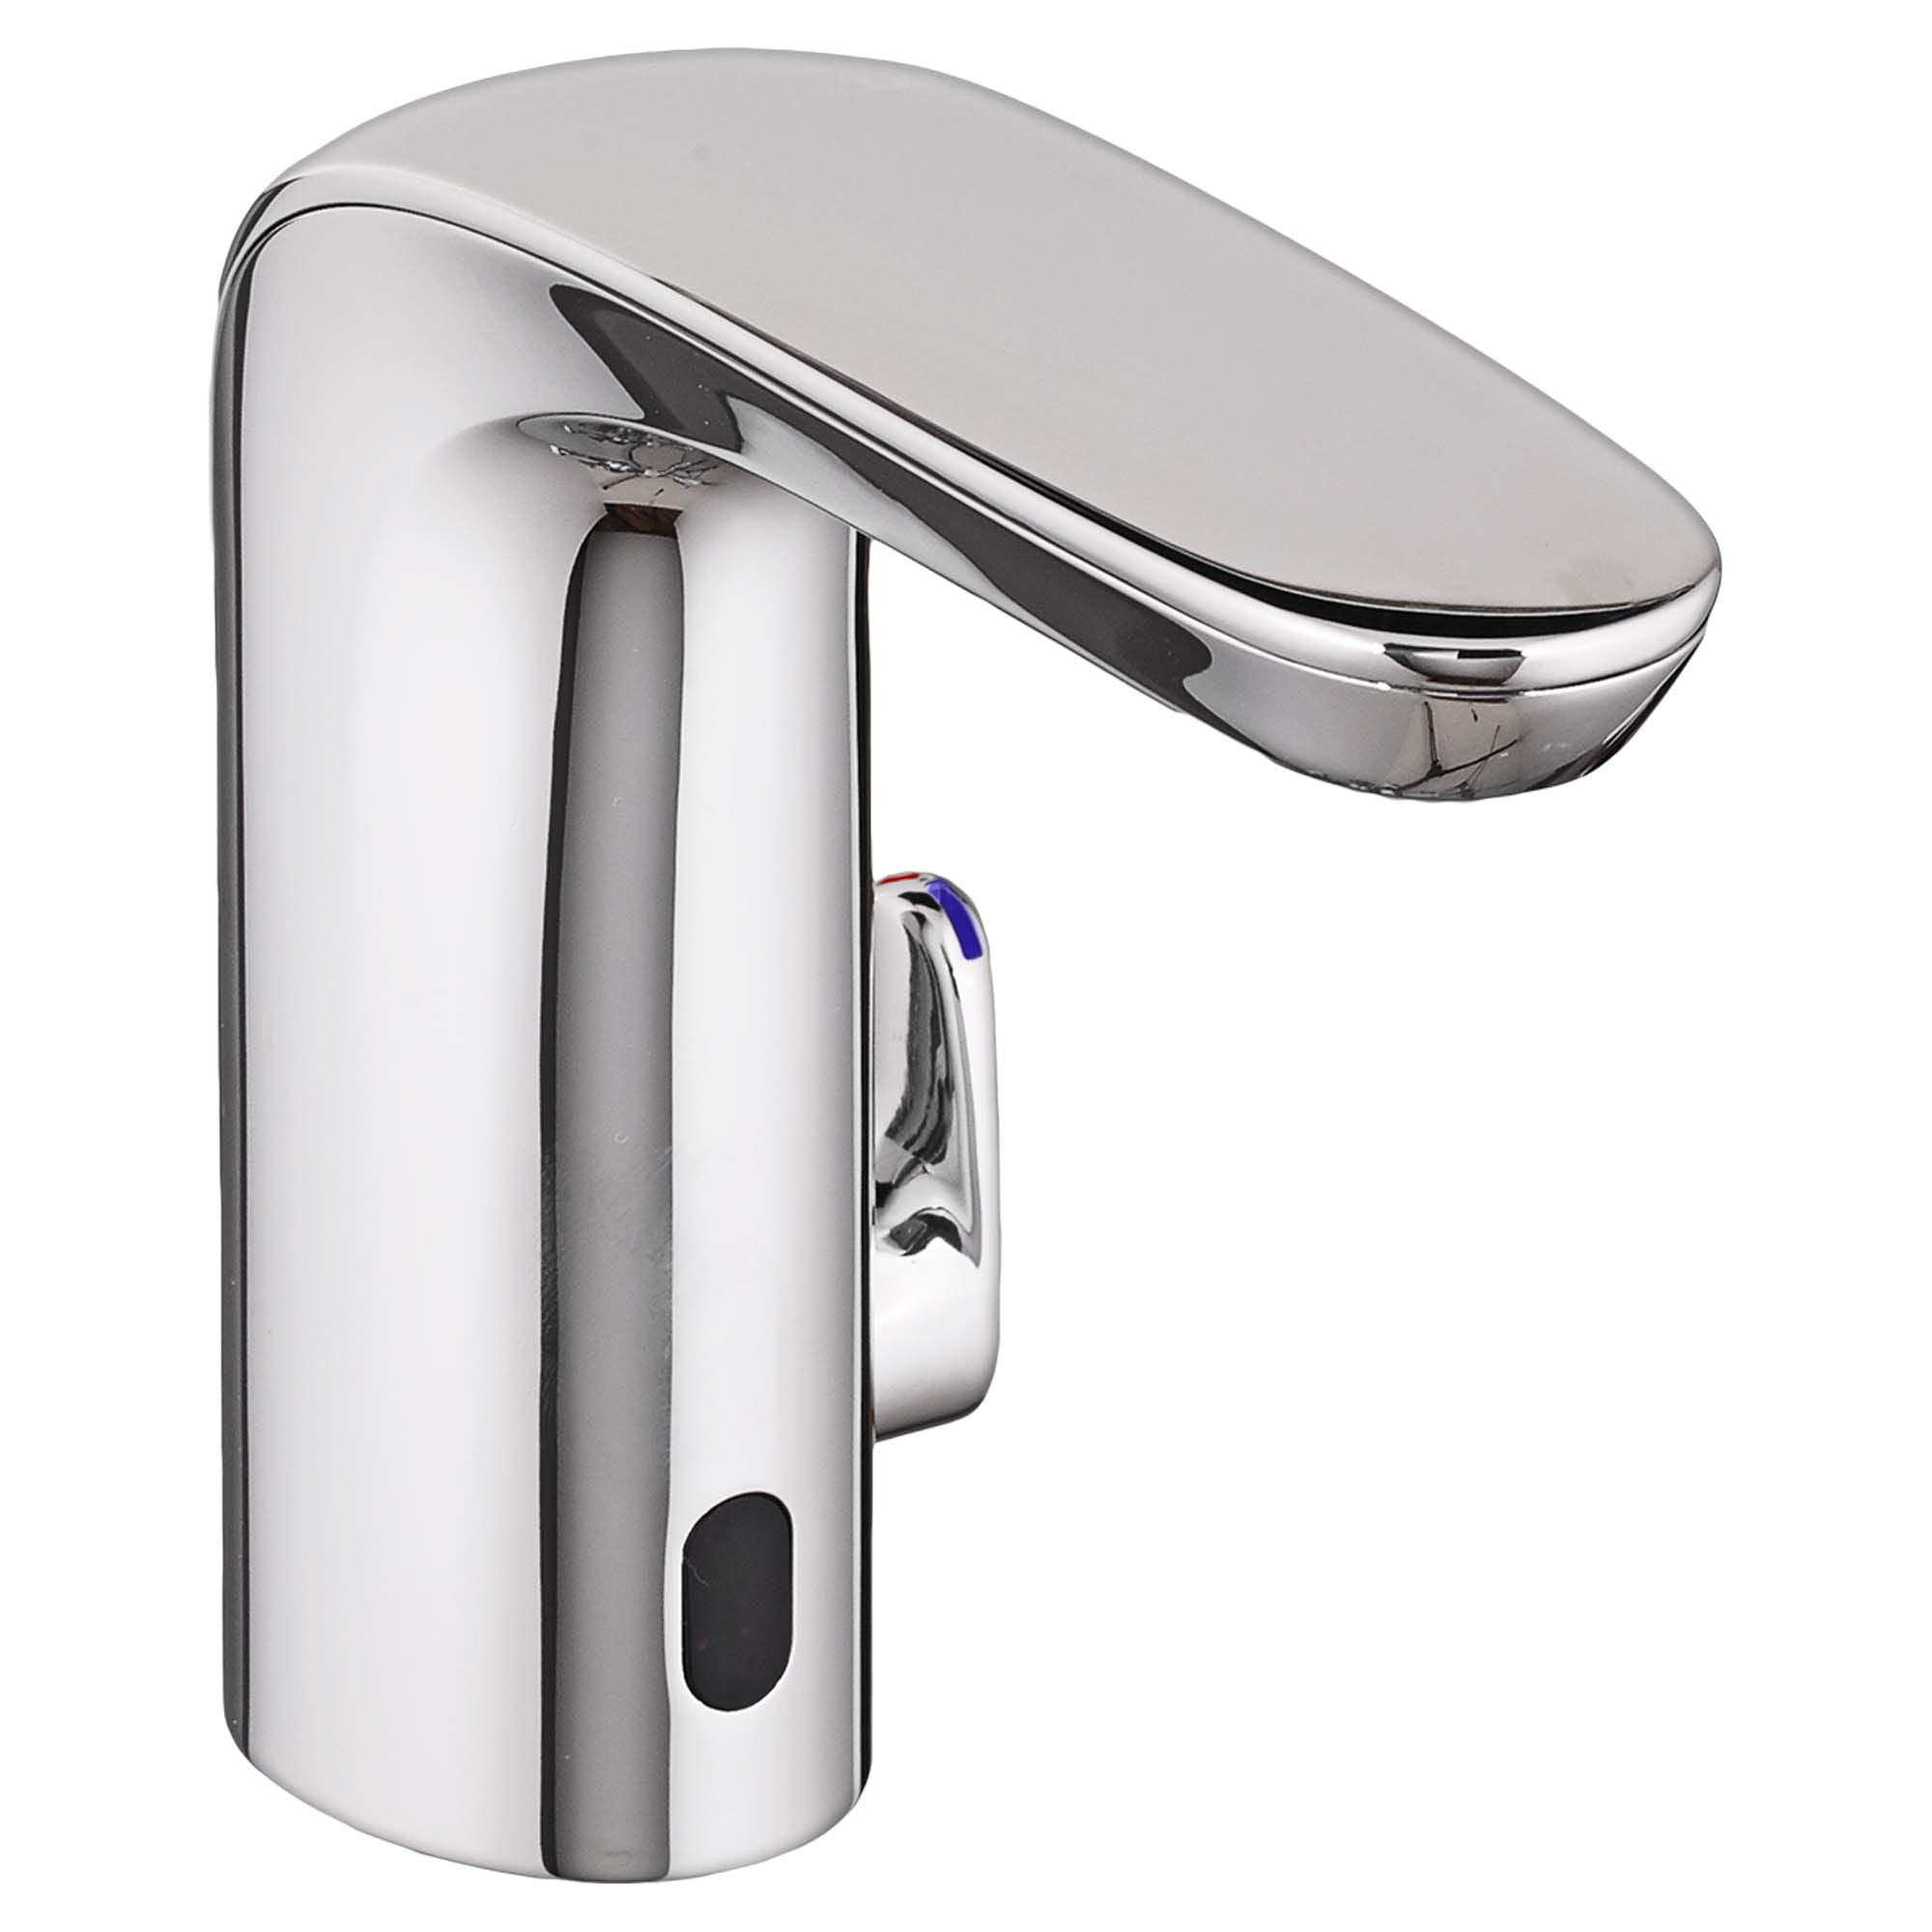 NextGen Selectronic Touchless Faucet Battery Powered 035 gpm 13 Lpm CHROME